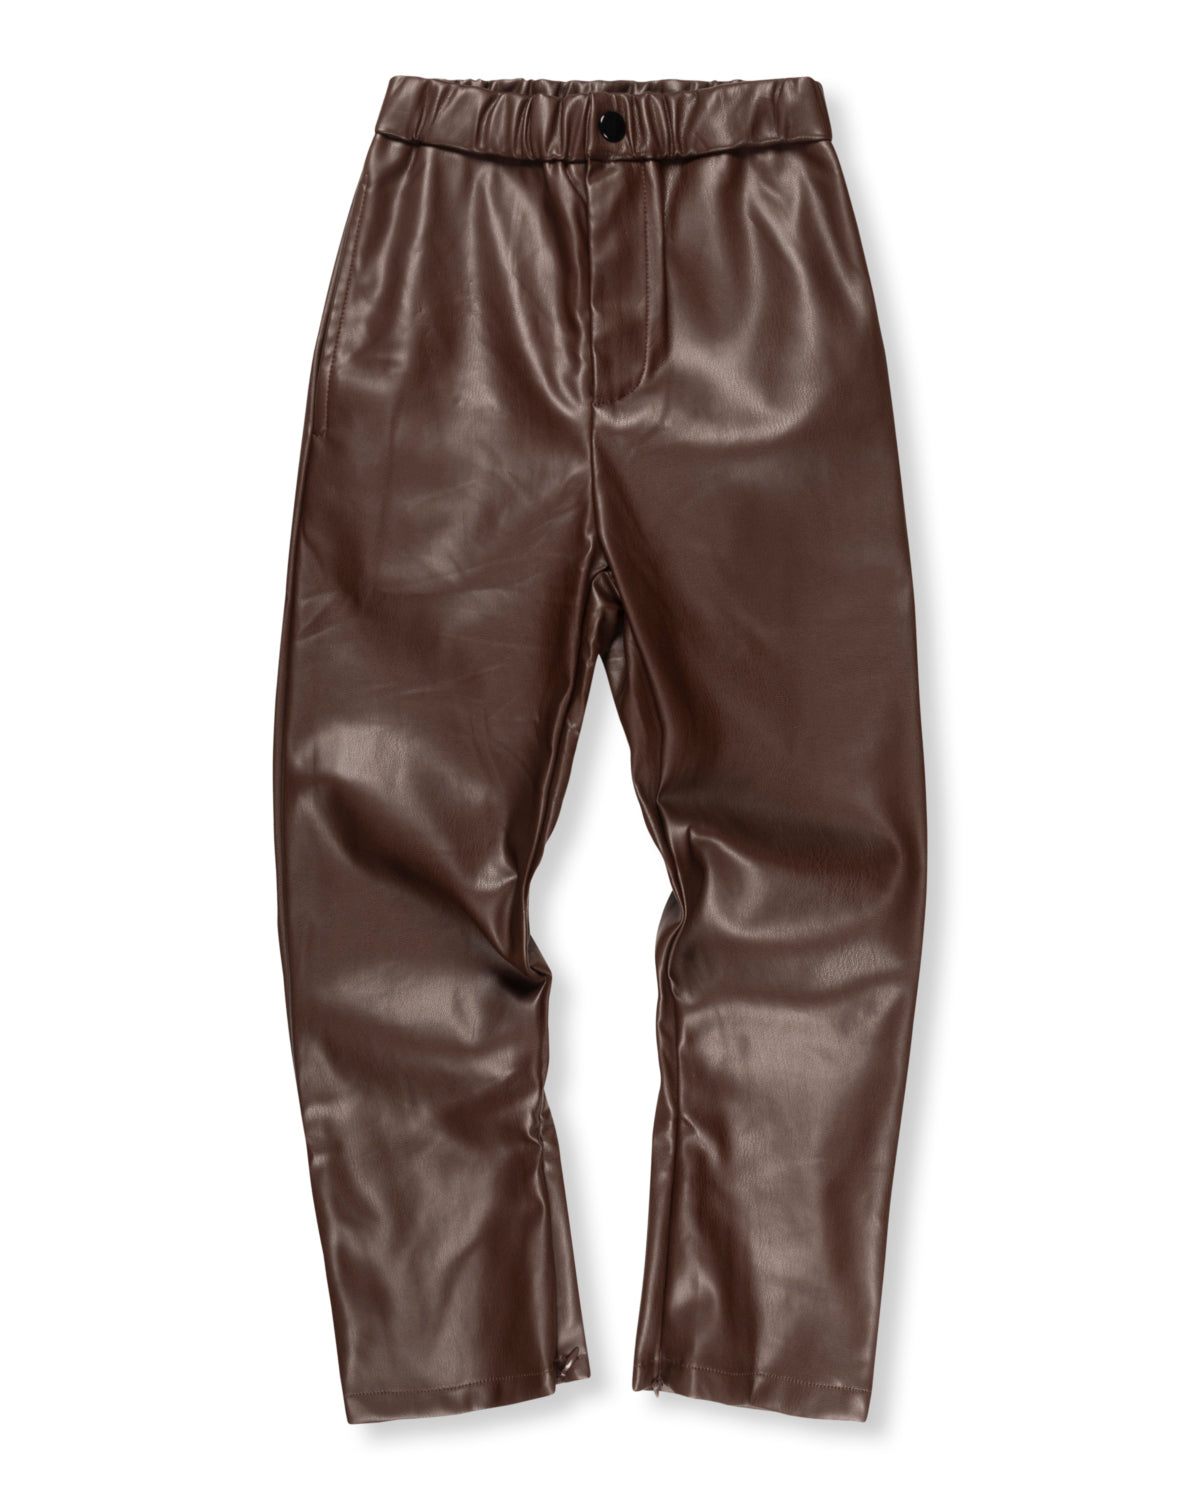 The Brown Faux Leather Pants